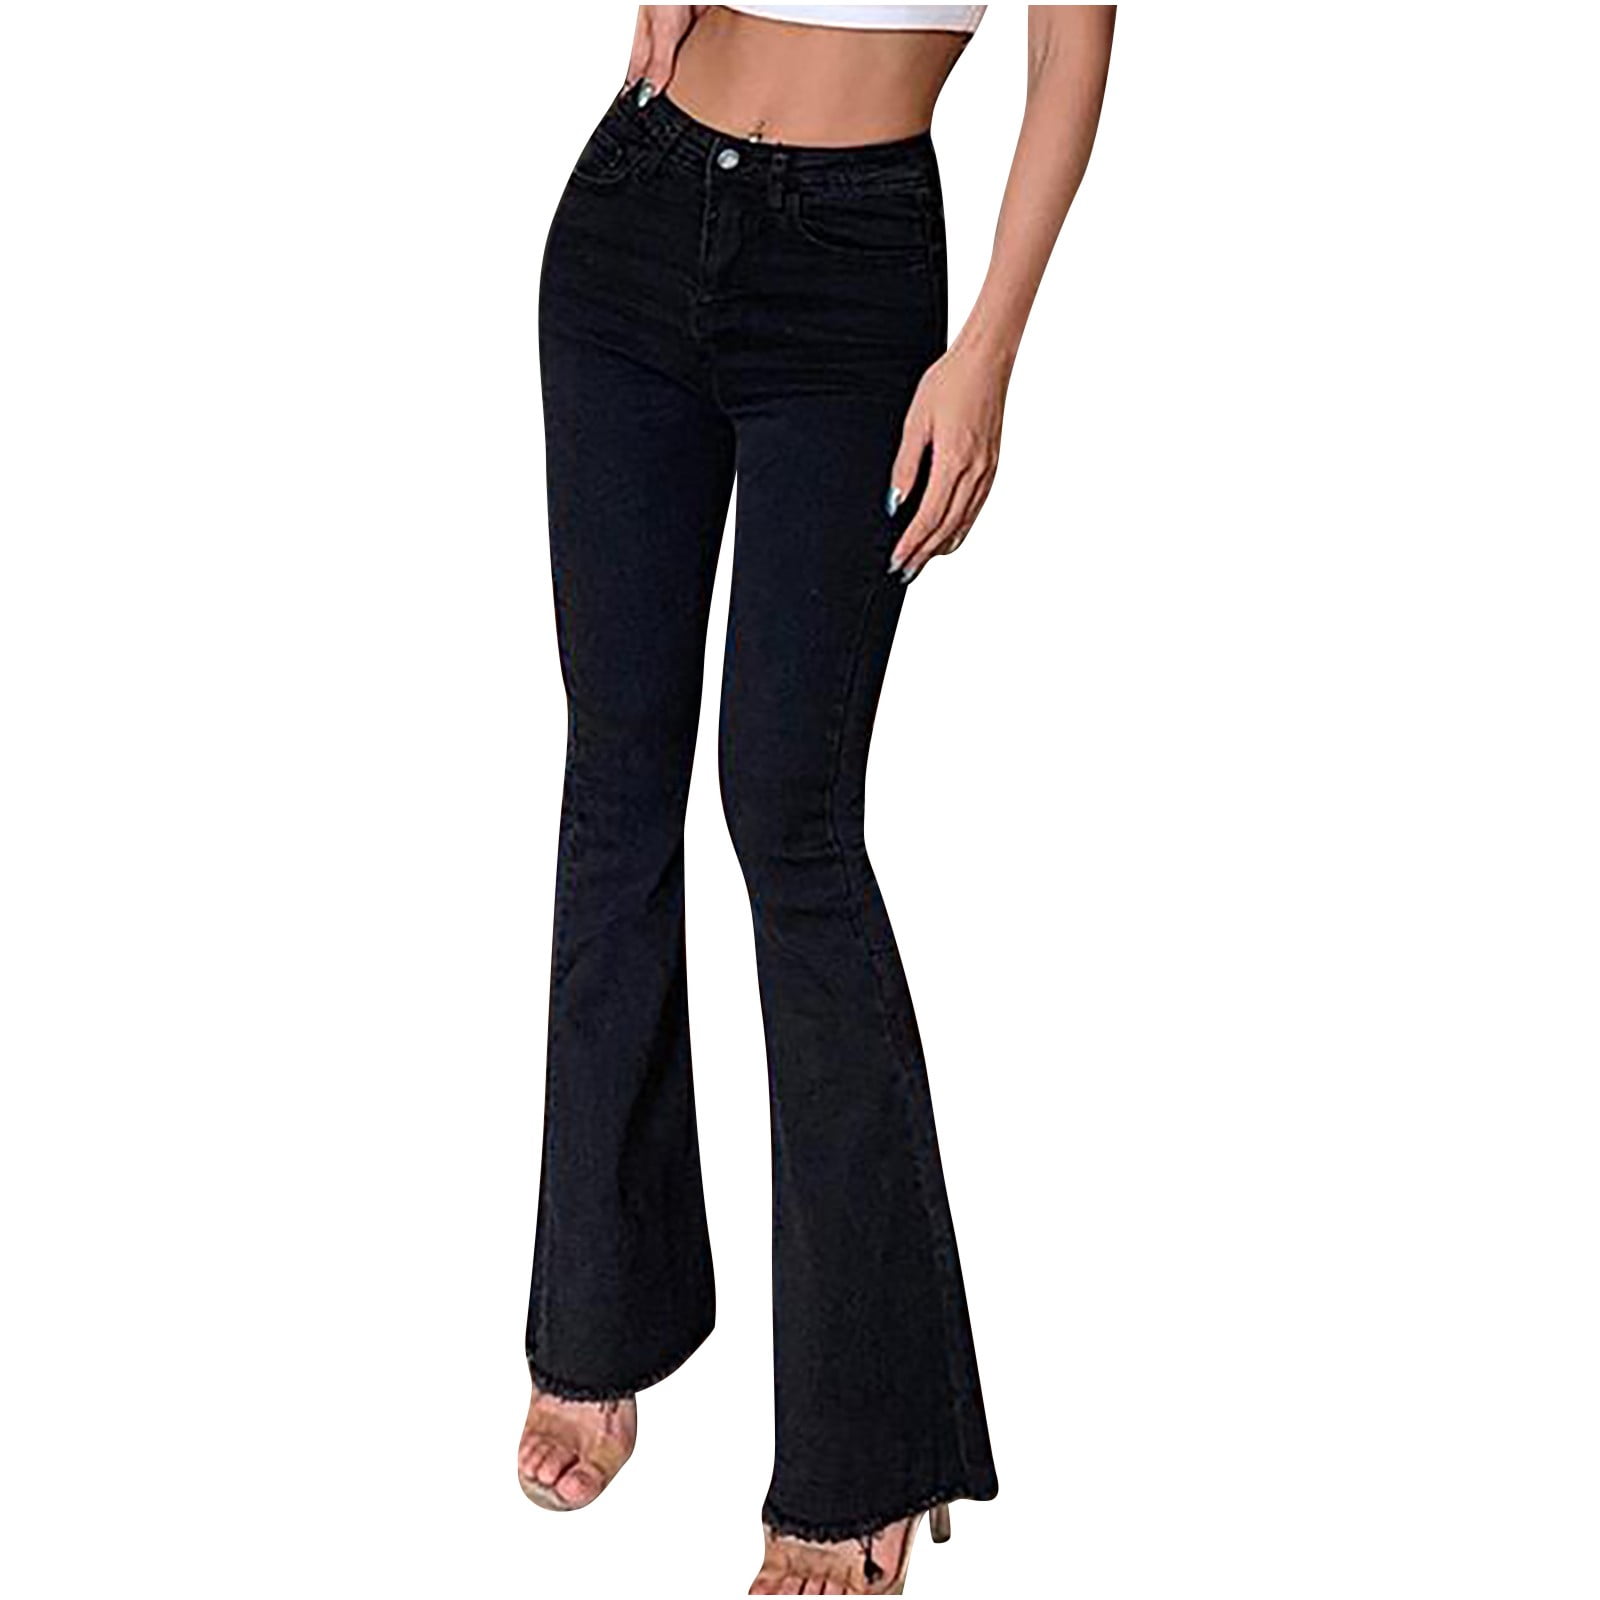 Fanxing Flare Jeans for Women, Women's Bootcut Bell Bottom Jeans High  Waisted Stretch Slimming Bell Bottoms Jeans Blue,Black,Dark Blue,S.M.L.XL.XXL  